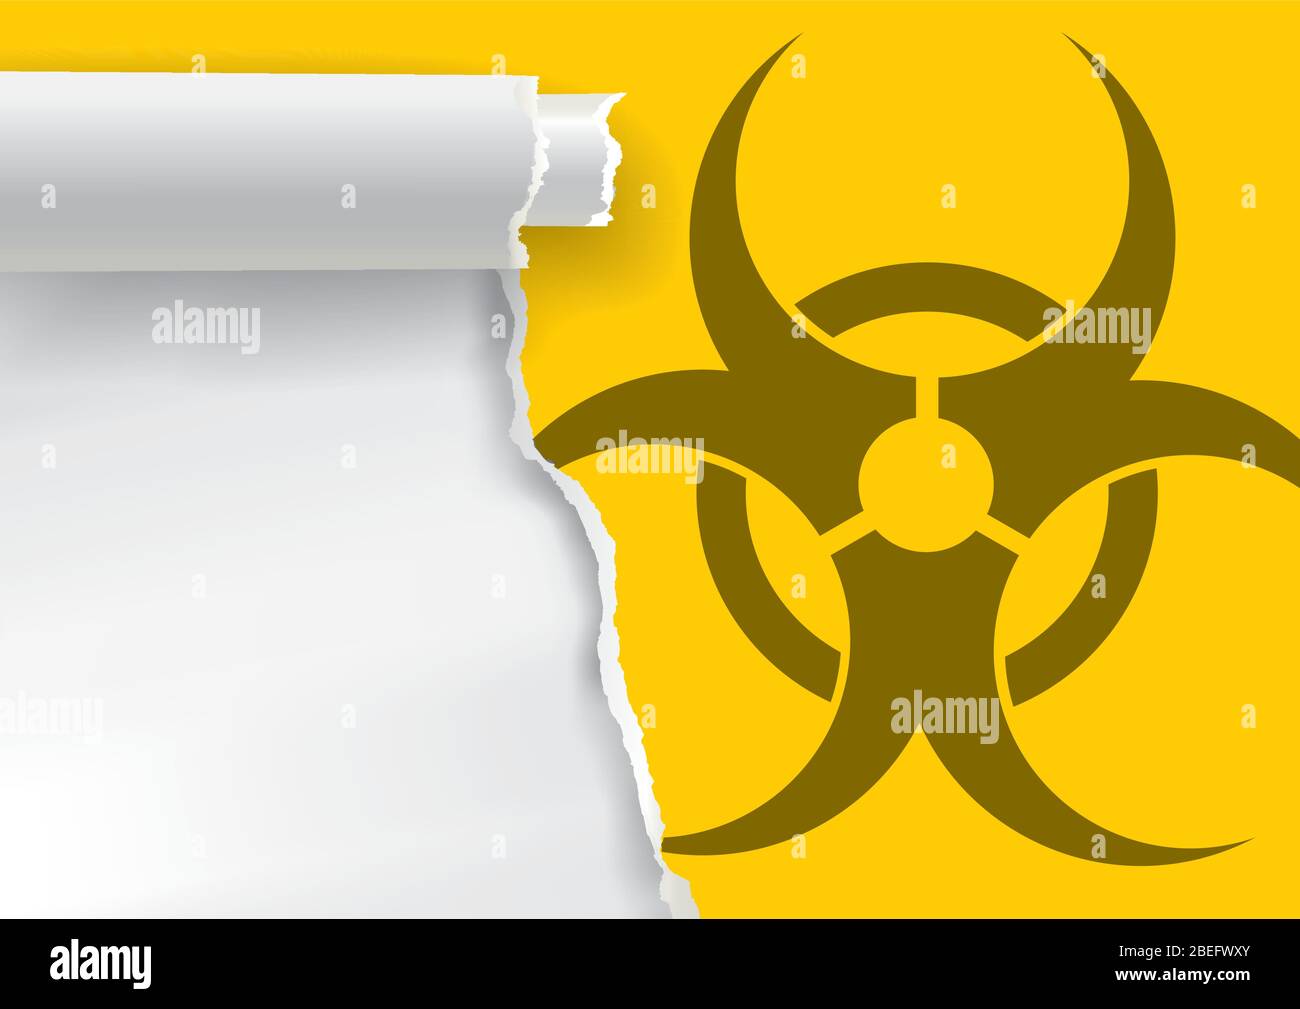 Ripped paper with biohazard symbol. Illustration of yellow torn paper backround with biohazard icon. Template for banner, place for your text or im Stock Vector